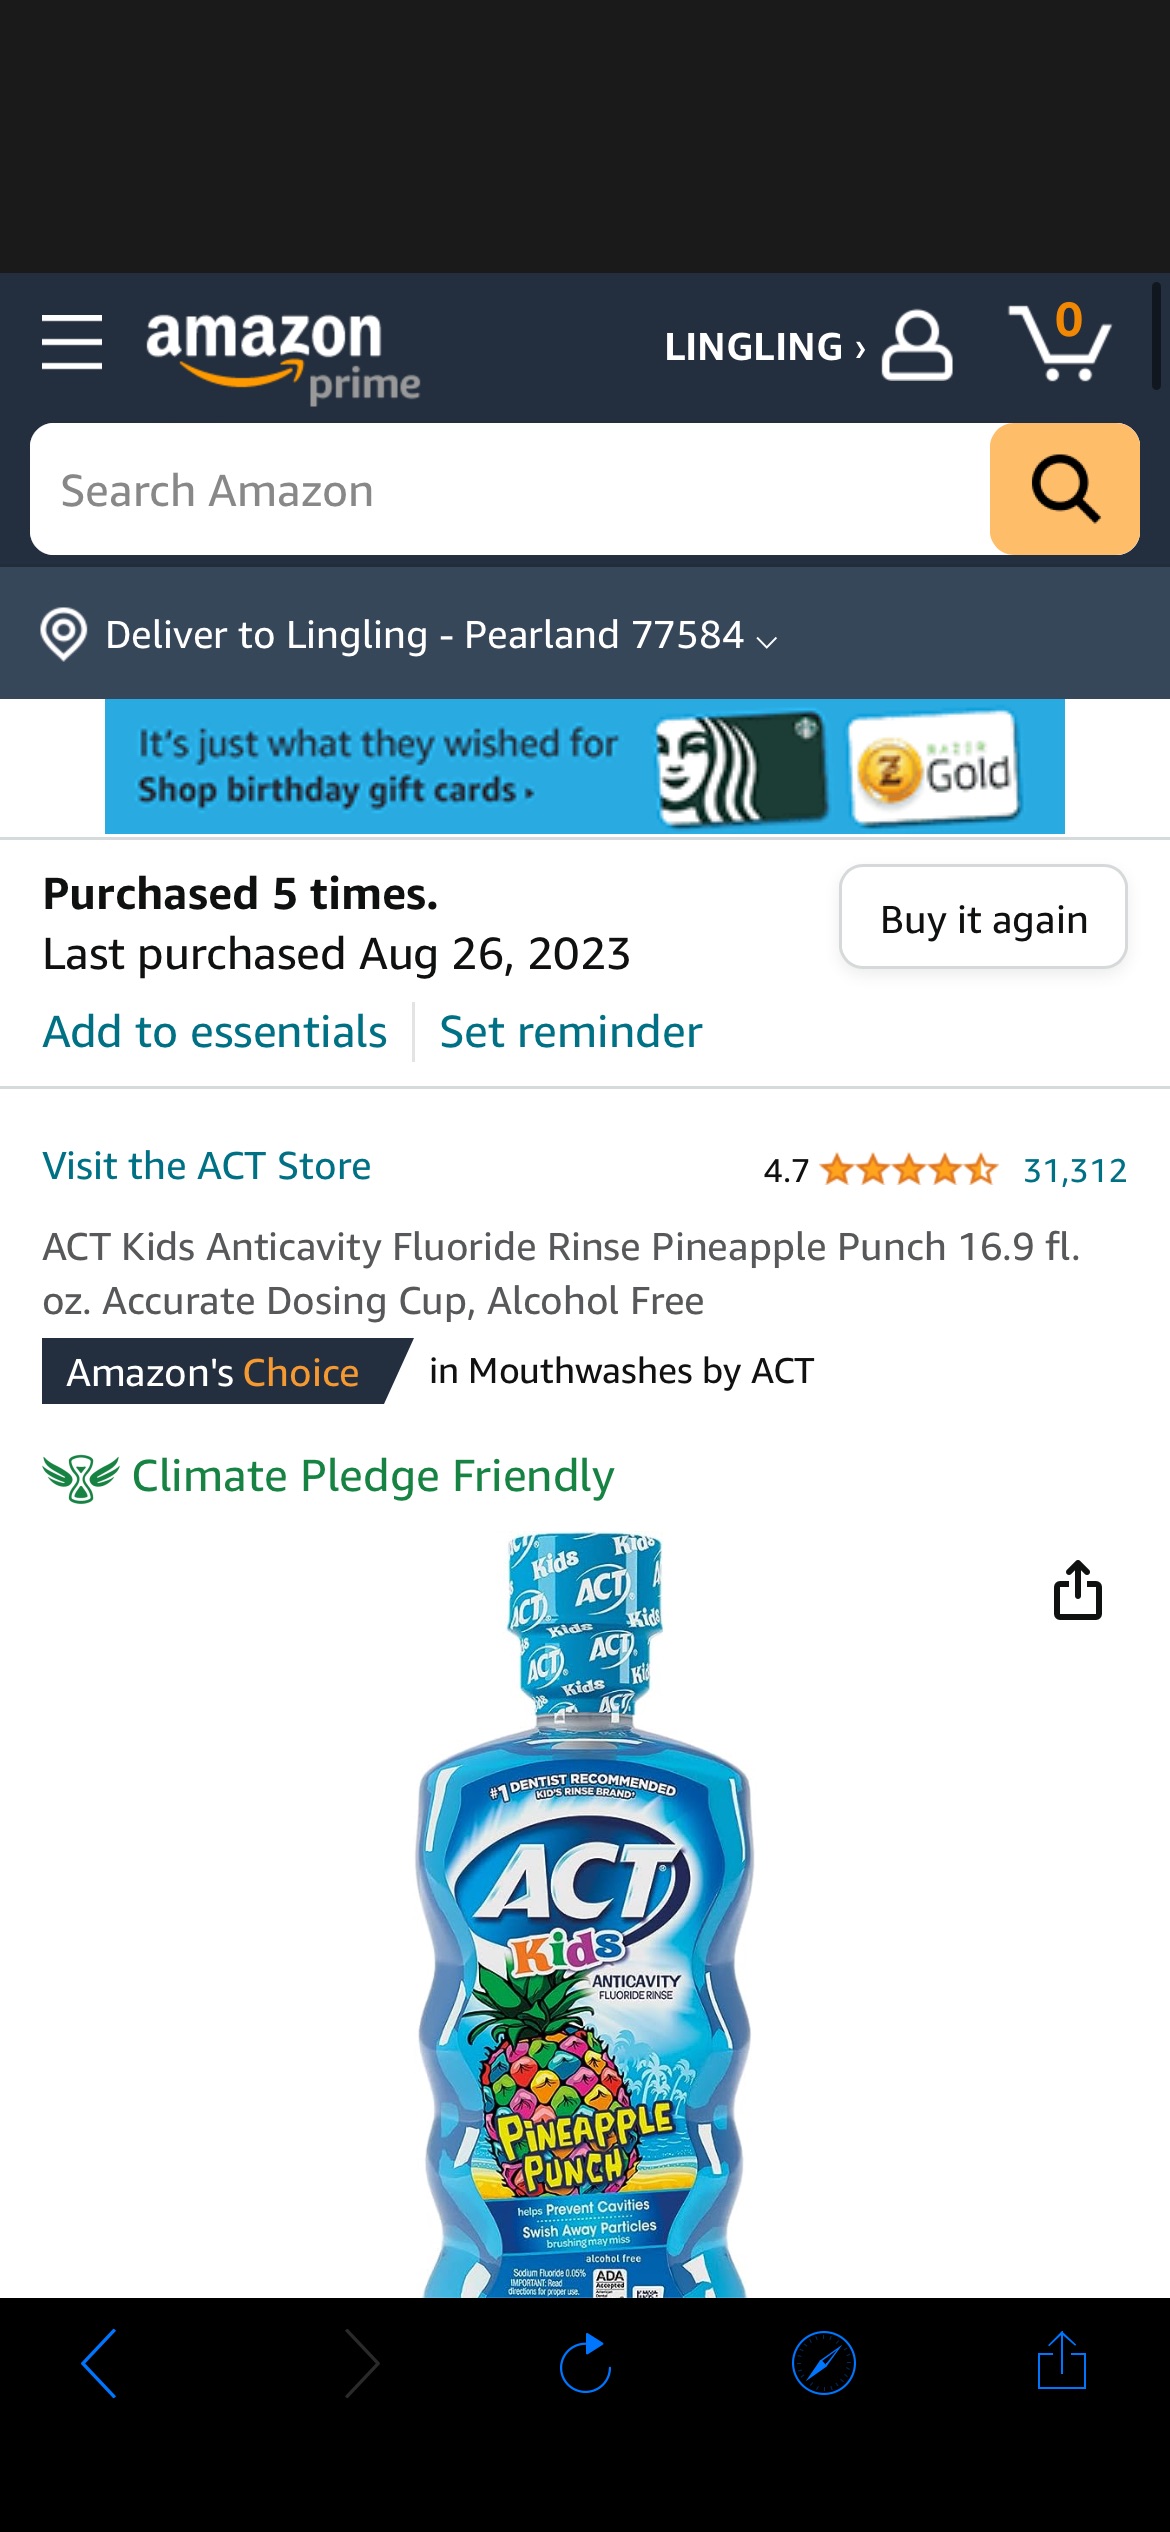 Amazon.com: ACT Kids Anticavity Fluoride Rinse Pineapple Punch 16.9 fl. oz. Accurate Dosing Cup, Alcohol Free : Health & Household